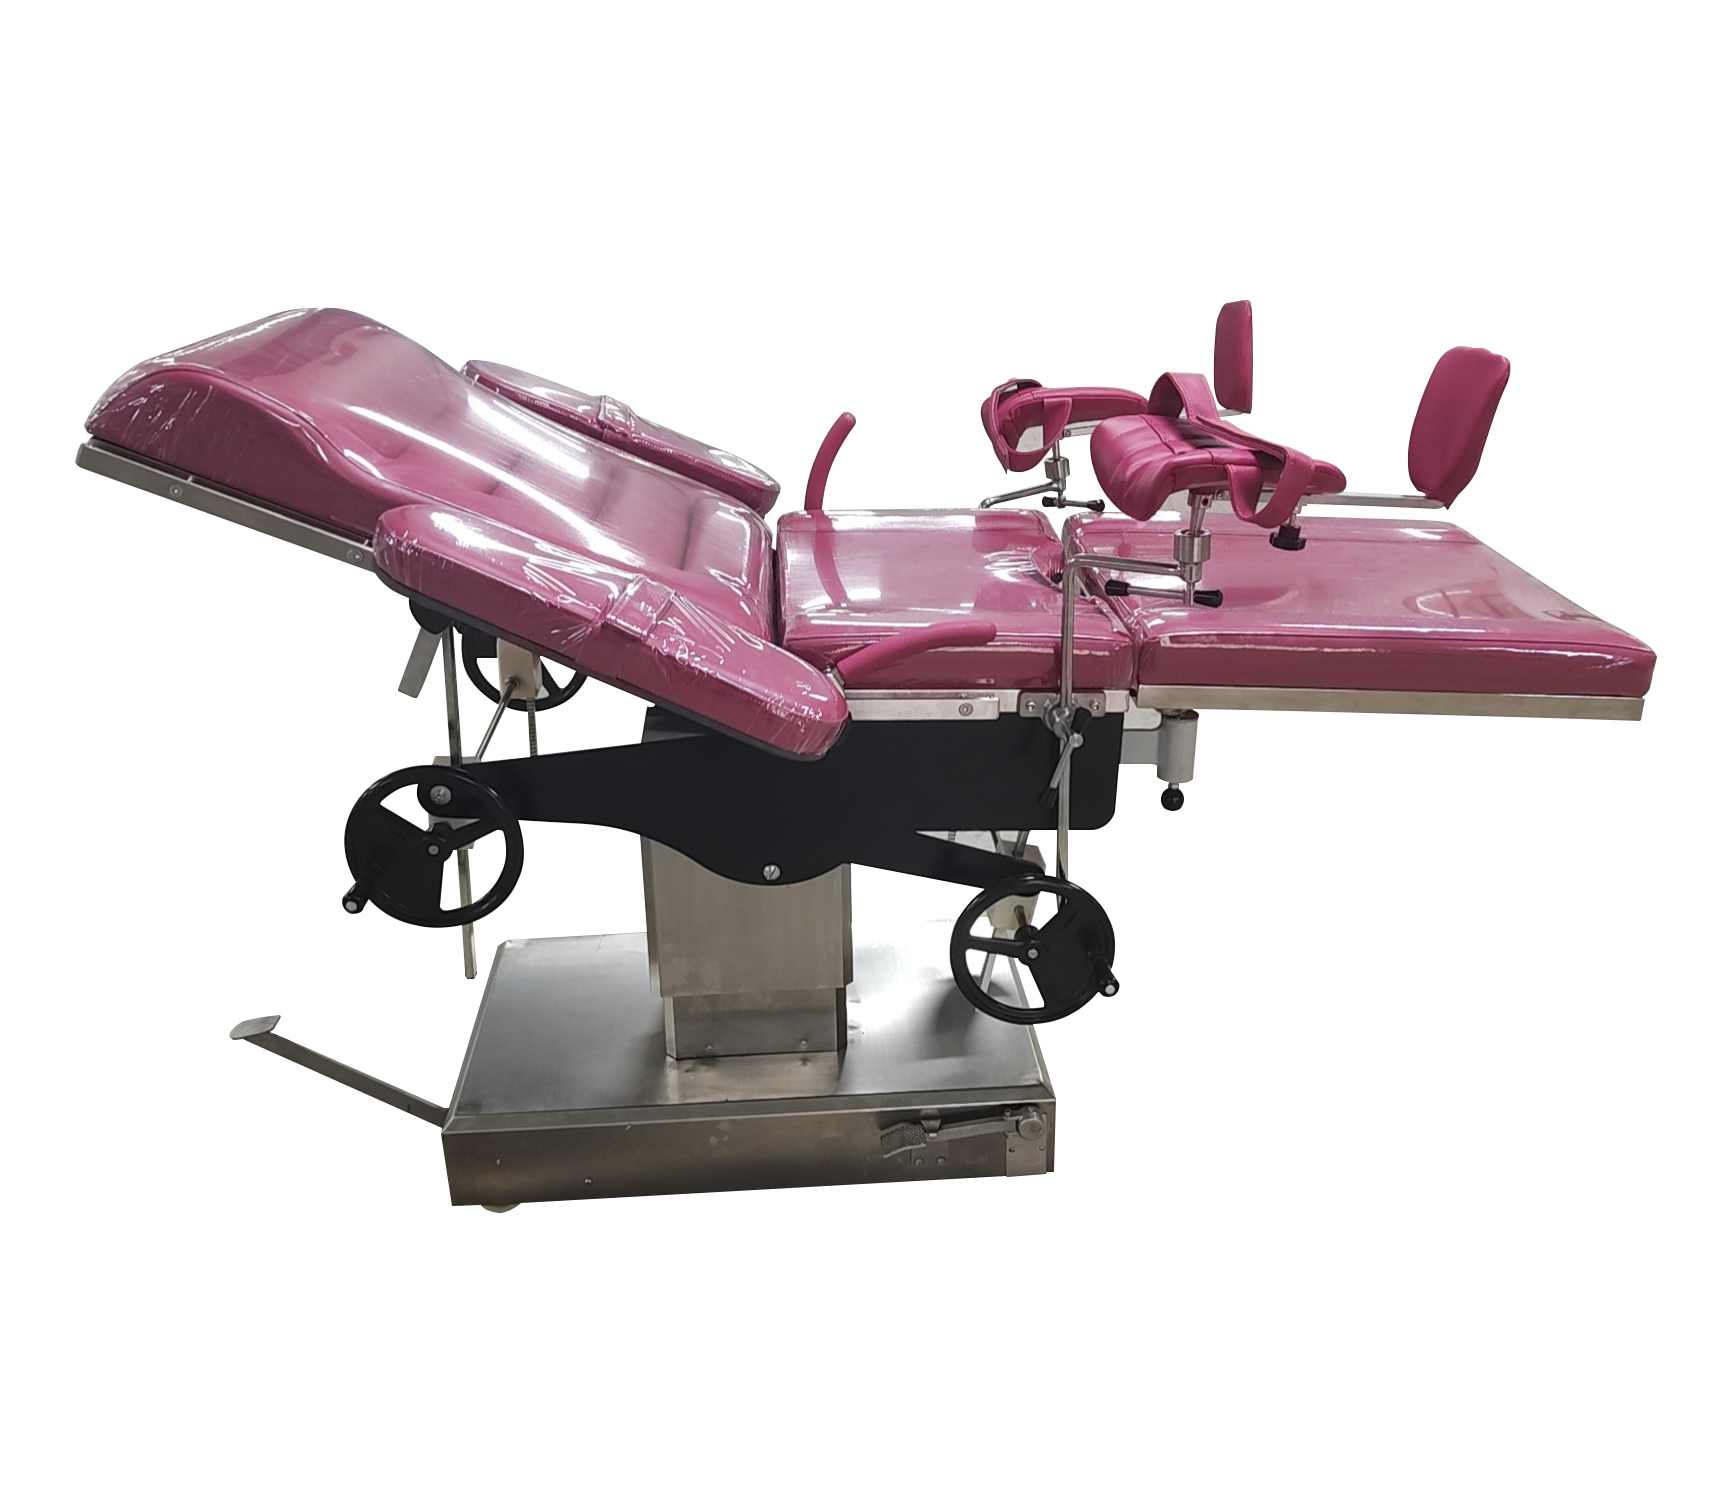 Hydraulic Stainless Steel Multifunction Adjustable Manual Hospital Obstetric Bed Gynecology Operation Delivery Table